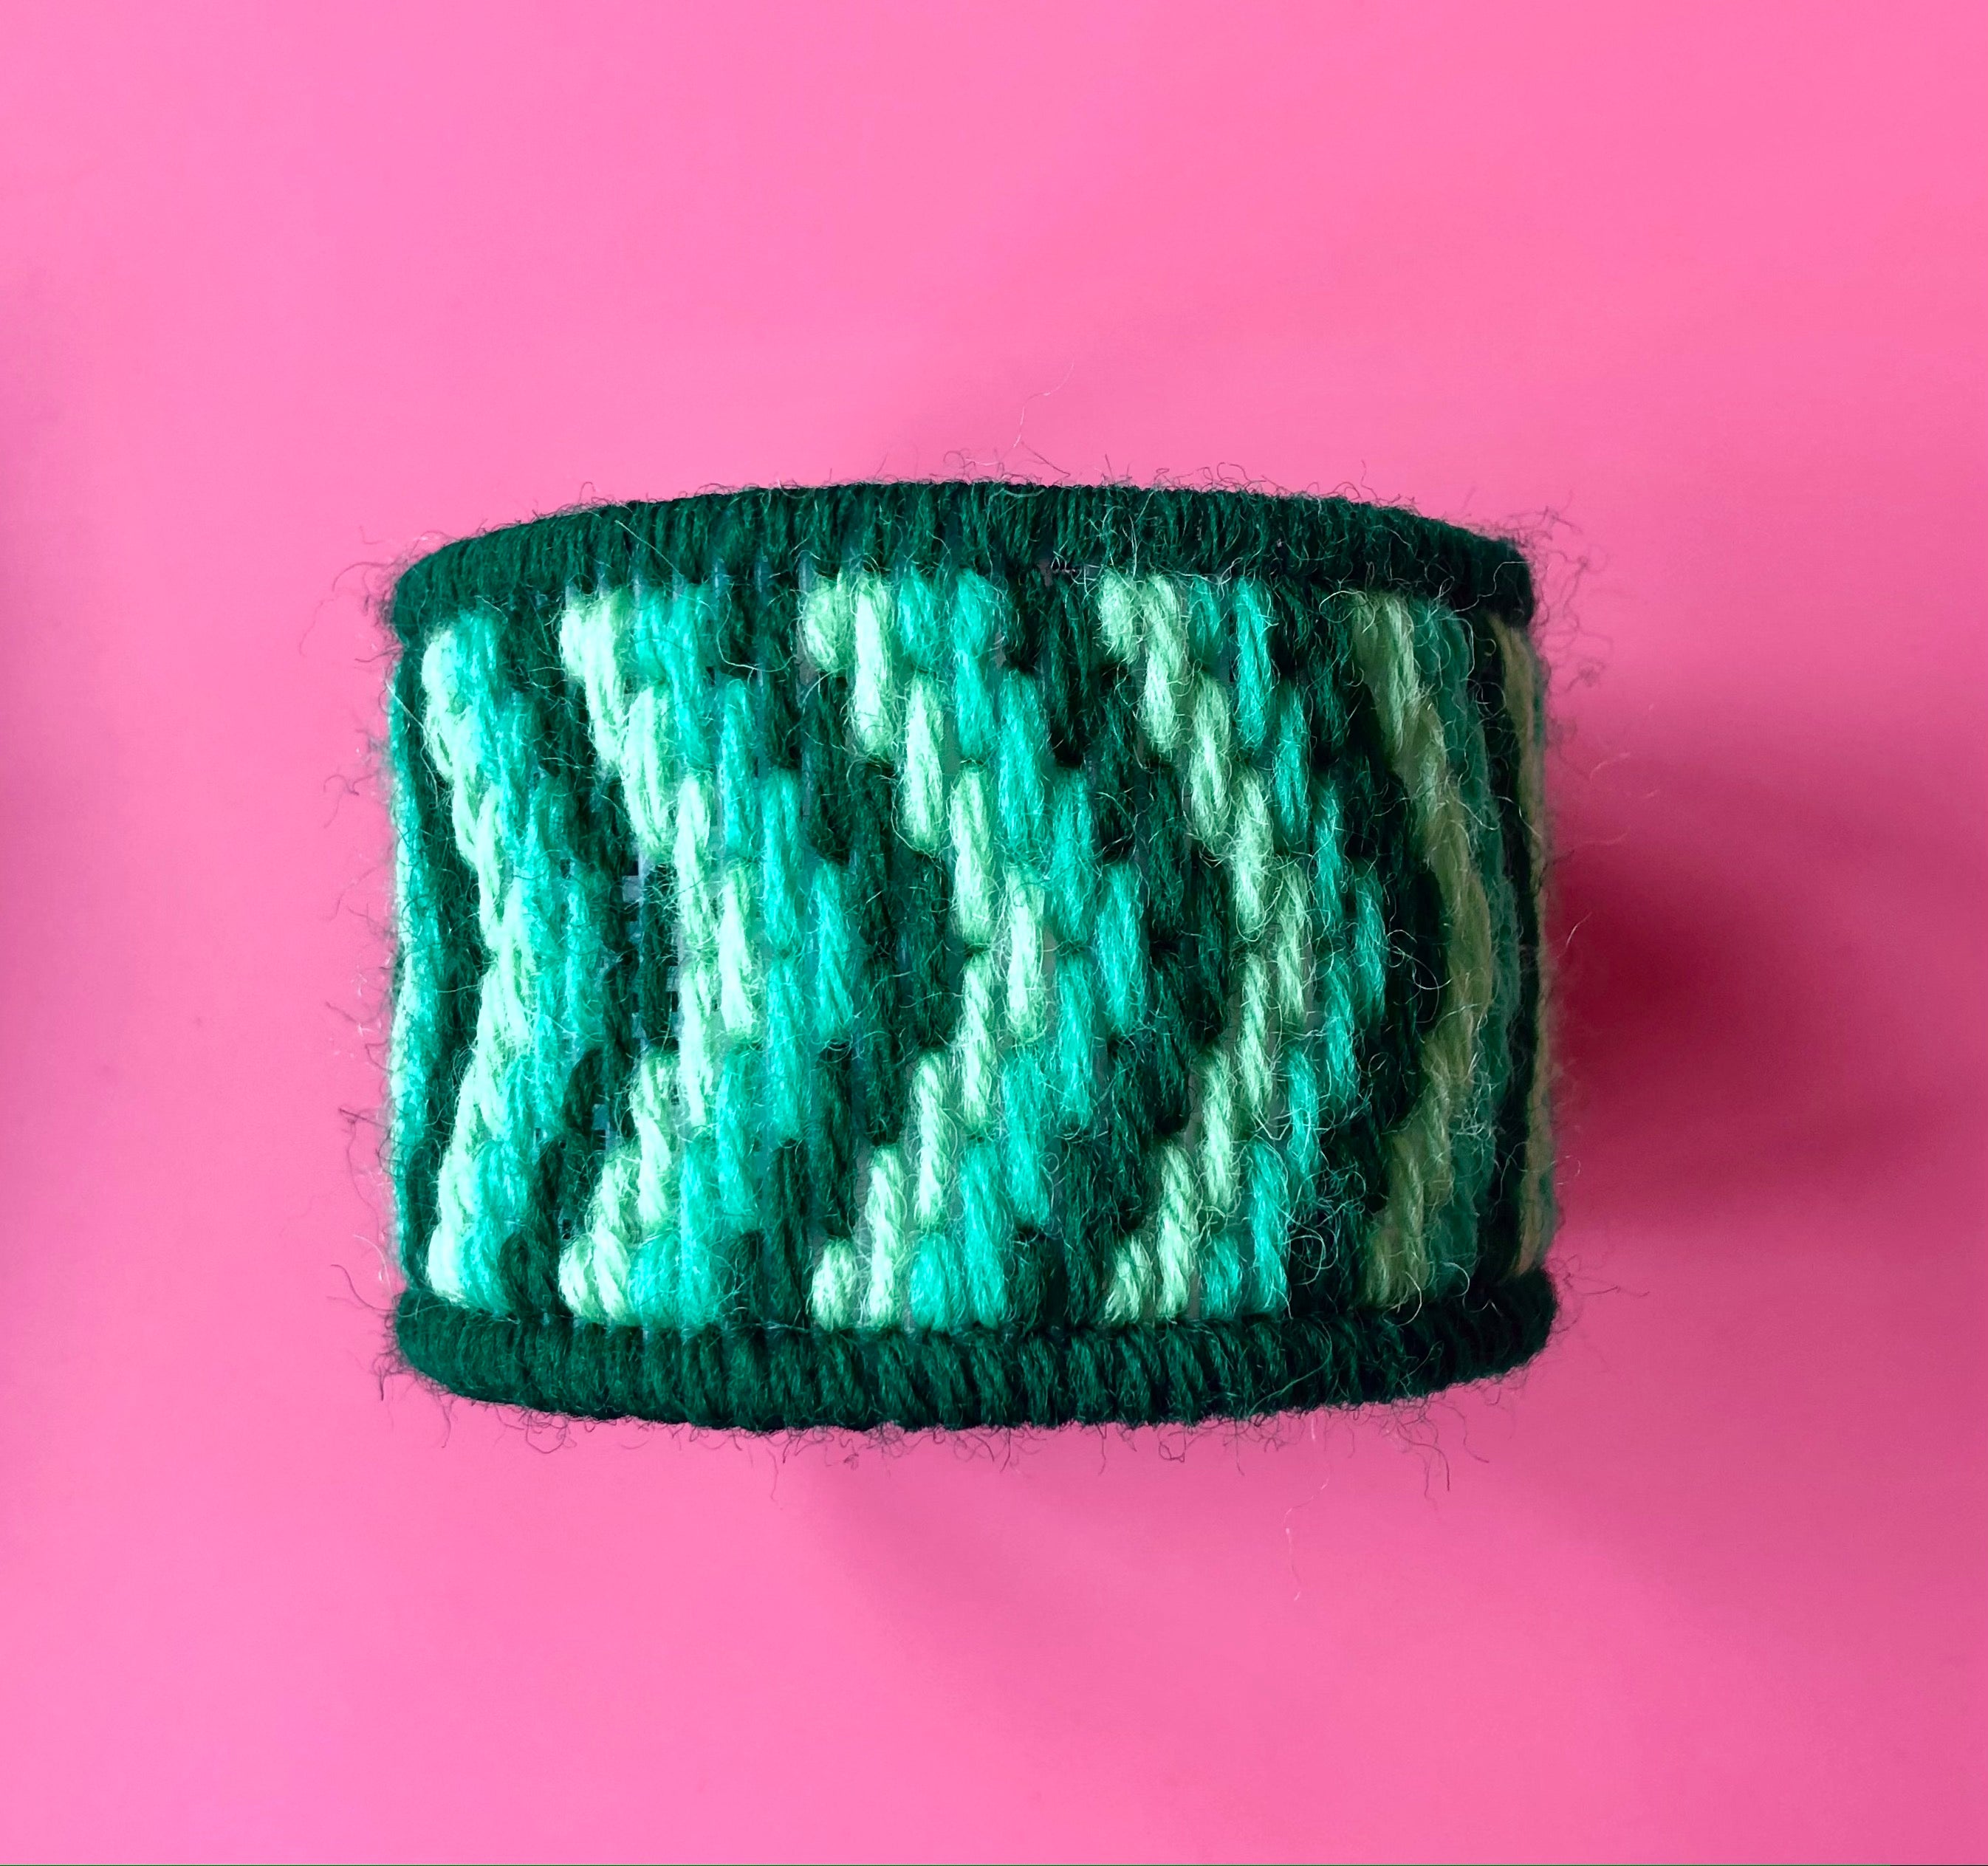 Embroidered Bangle Instant Downloadable PDF Pattern